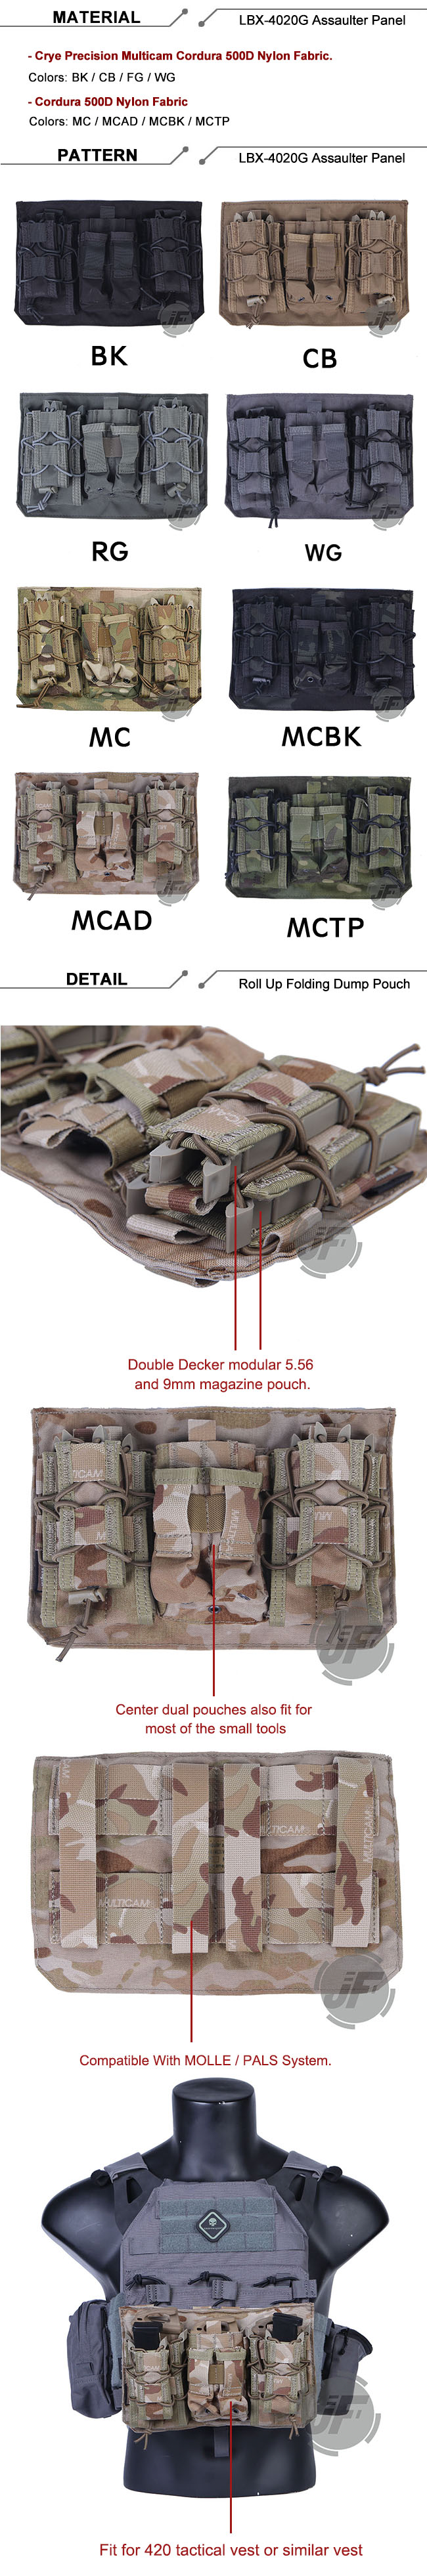 4020 Plate Carrier Emerson LBX-4020F Assaulter Panel w/ Mag Pouch For 4019